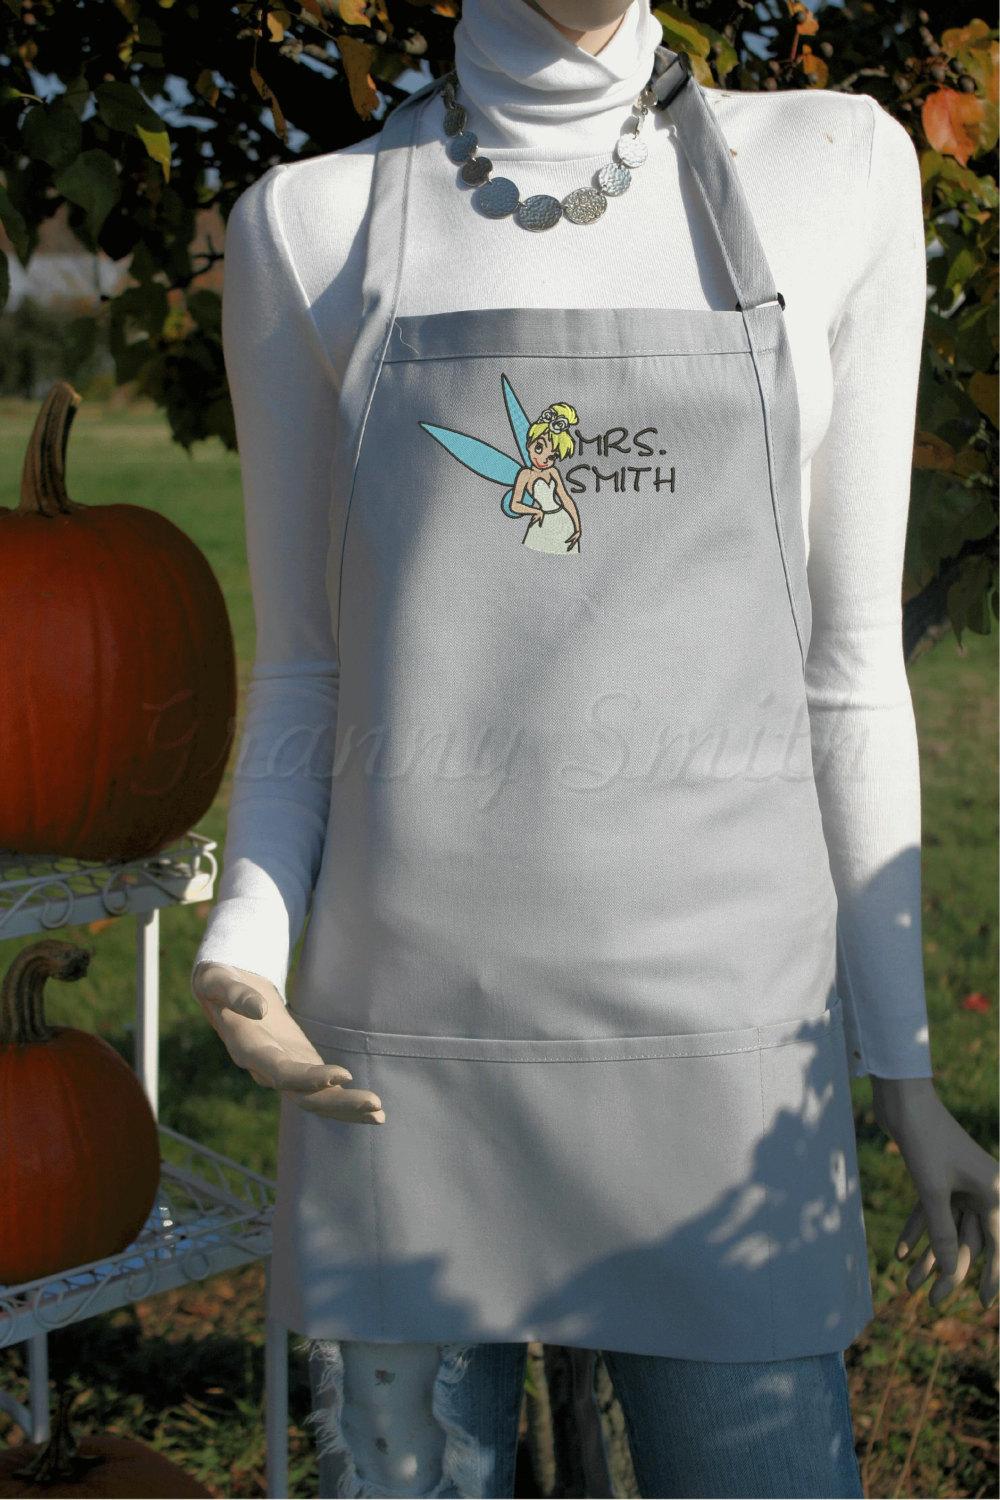 Tinkerbell embroidery design in a wedding dress apron — grey